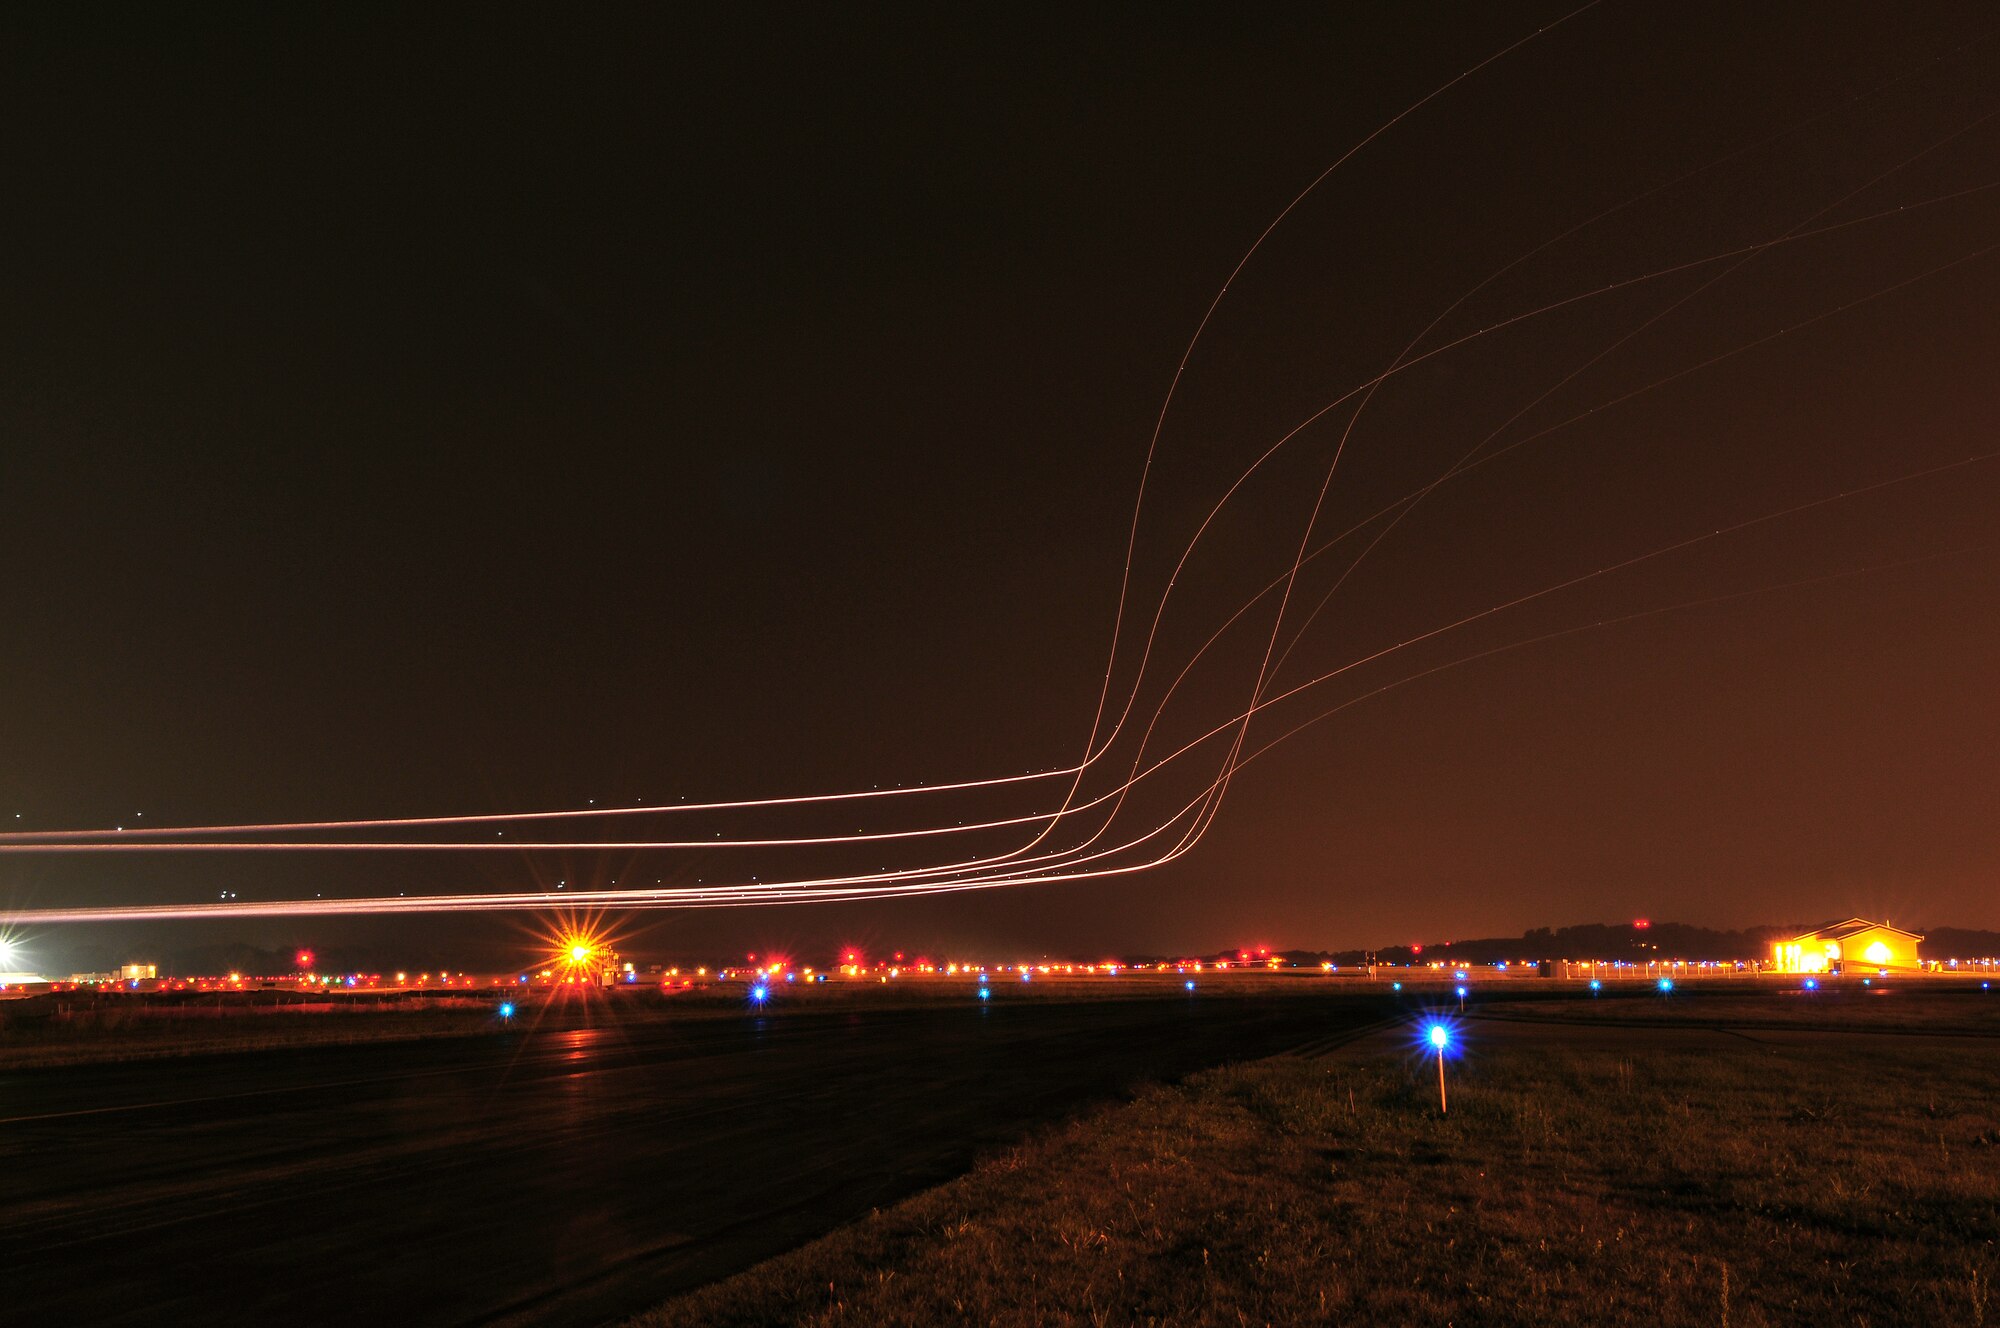 The glow from the afterburners of multiple  F-16 fighter jets adorn the night sky over Dane County Regional Airport early on the morning of September 22, 2009. The 115th Fighter Wing launched 14 F-16s early Tuesday morning as part of the wings scheduled Aerospace Expeditionary Force rotation that began last week when approximately 200 of the unit's members deployed in support of Operation Iraqi Freedom. (US Air Force photo by Master Sgt. Paul Gorman)